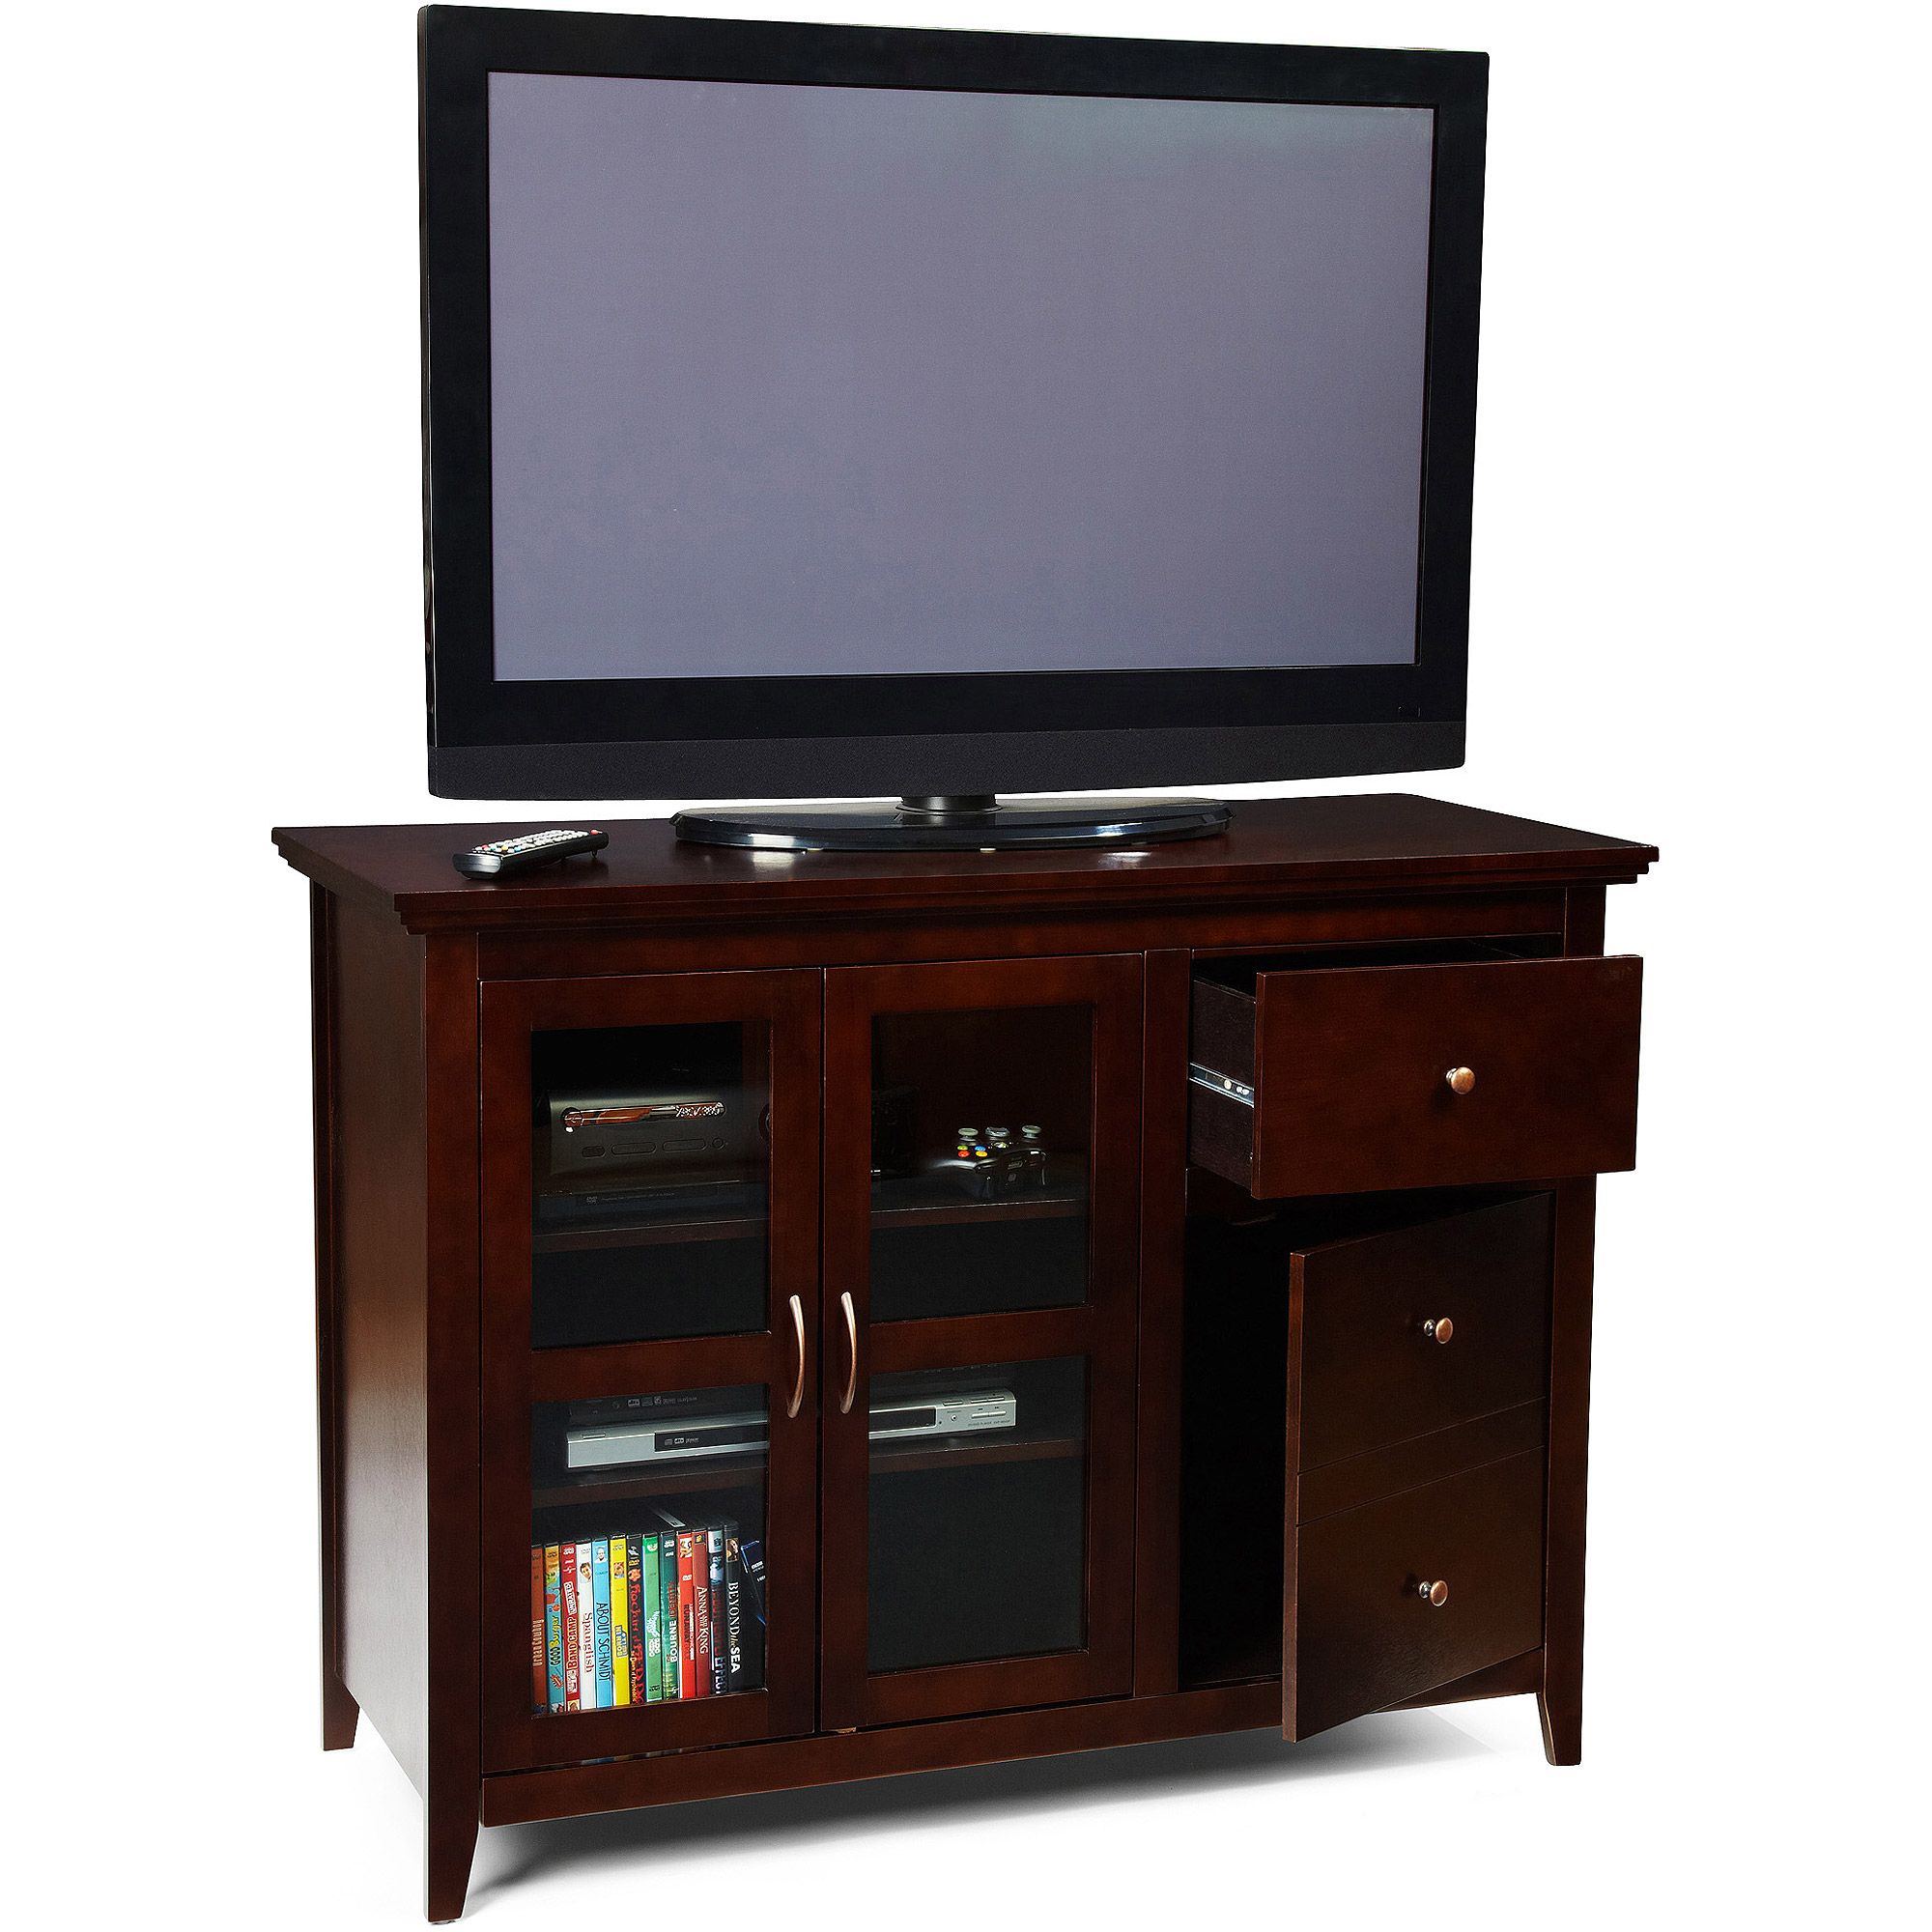 Walker Edison Tv Stand For Tvs Up To 48", Multiple Colors Throughout Vasari Corner Flat Panel Tv Stands For Tvs Up To 48" Black (View 3 of 15)